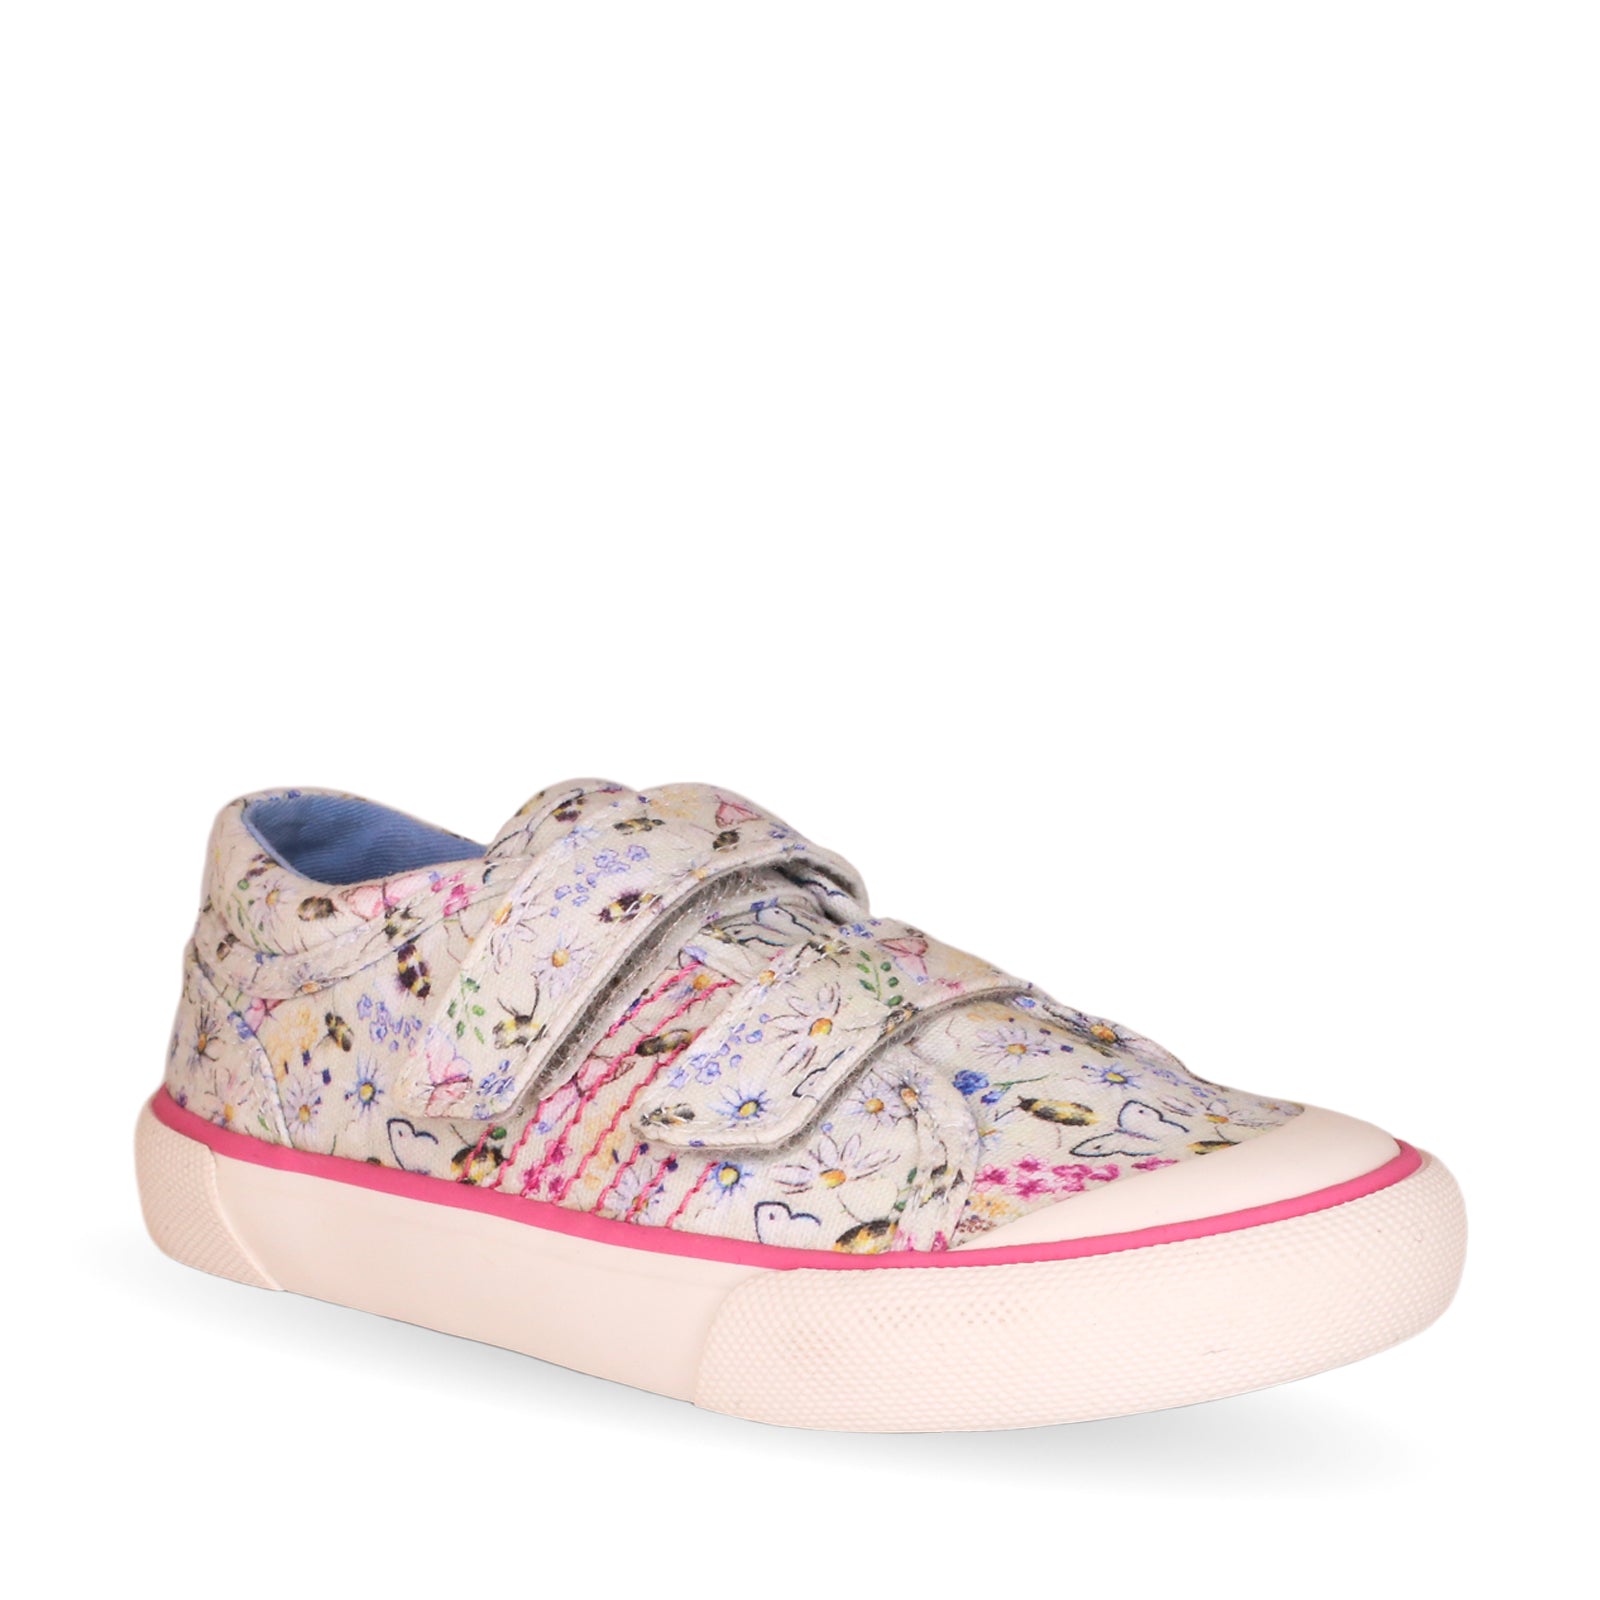 Start-Rite Meadow 6184_4 Girls Cream Floral Canvas Touch Fastening Shoes